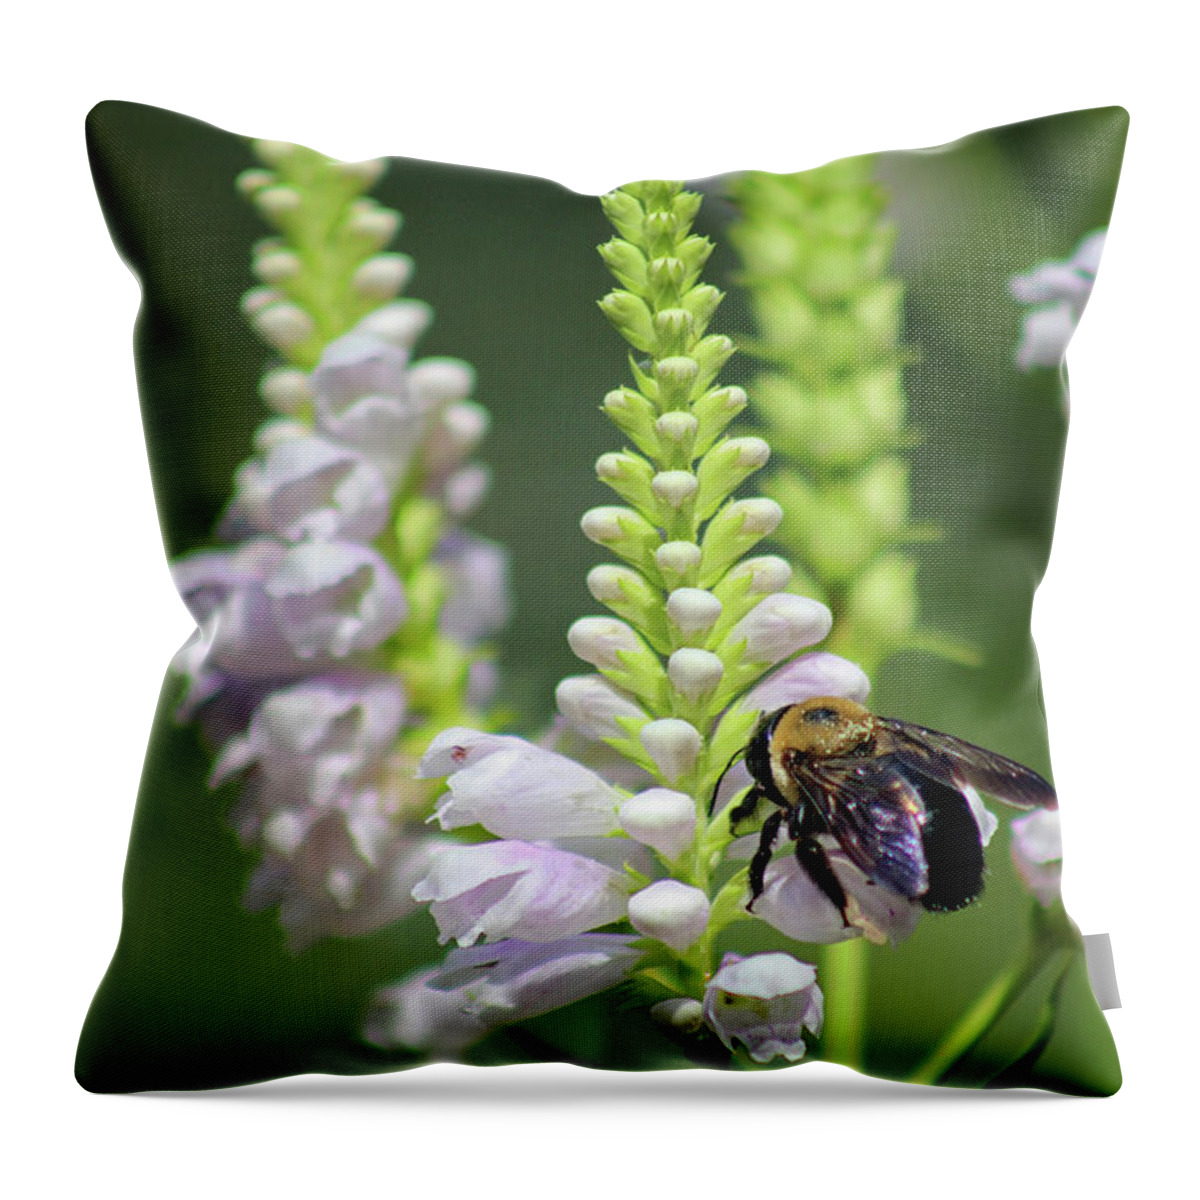 Bumblebee Throw Pillow featuring the photograph Bumblebee on Obedient Flower by Karen Adams